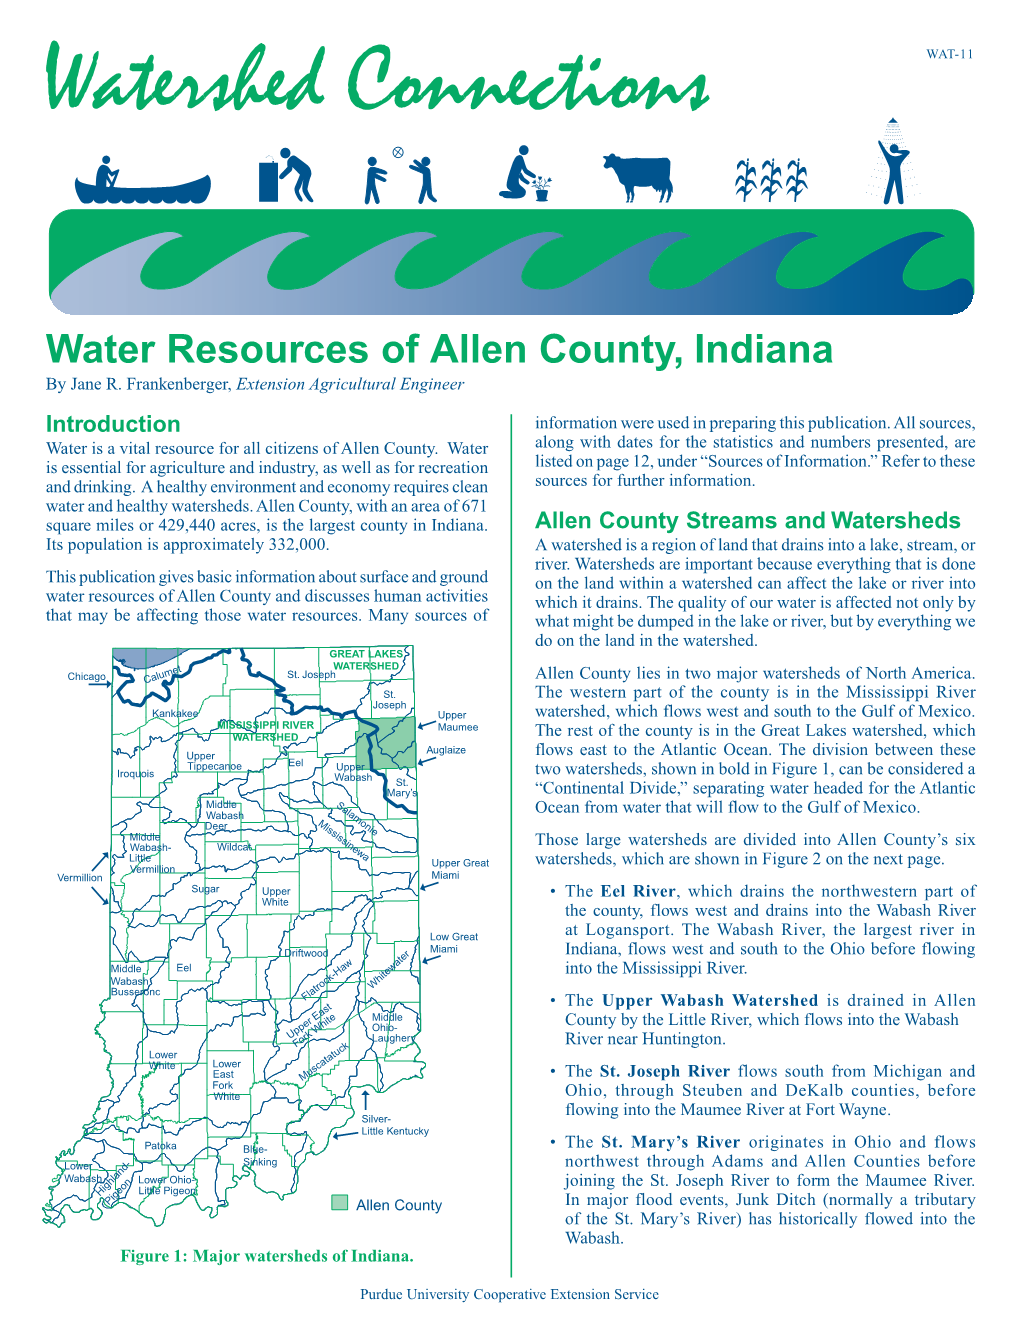 Water Resources of Allen County, Indiana by Jane R